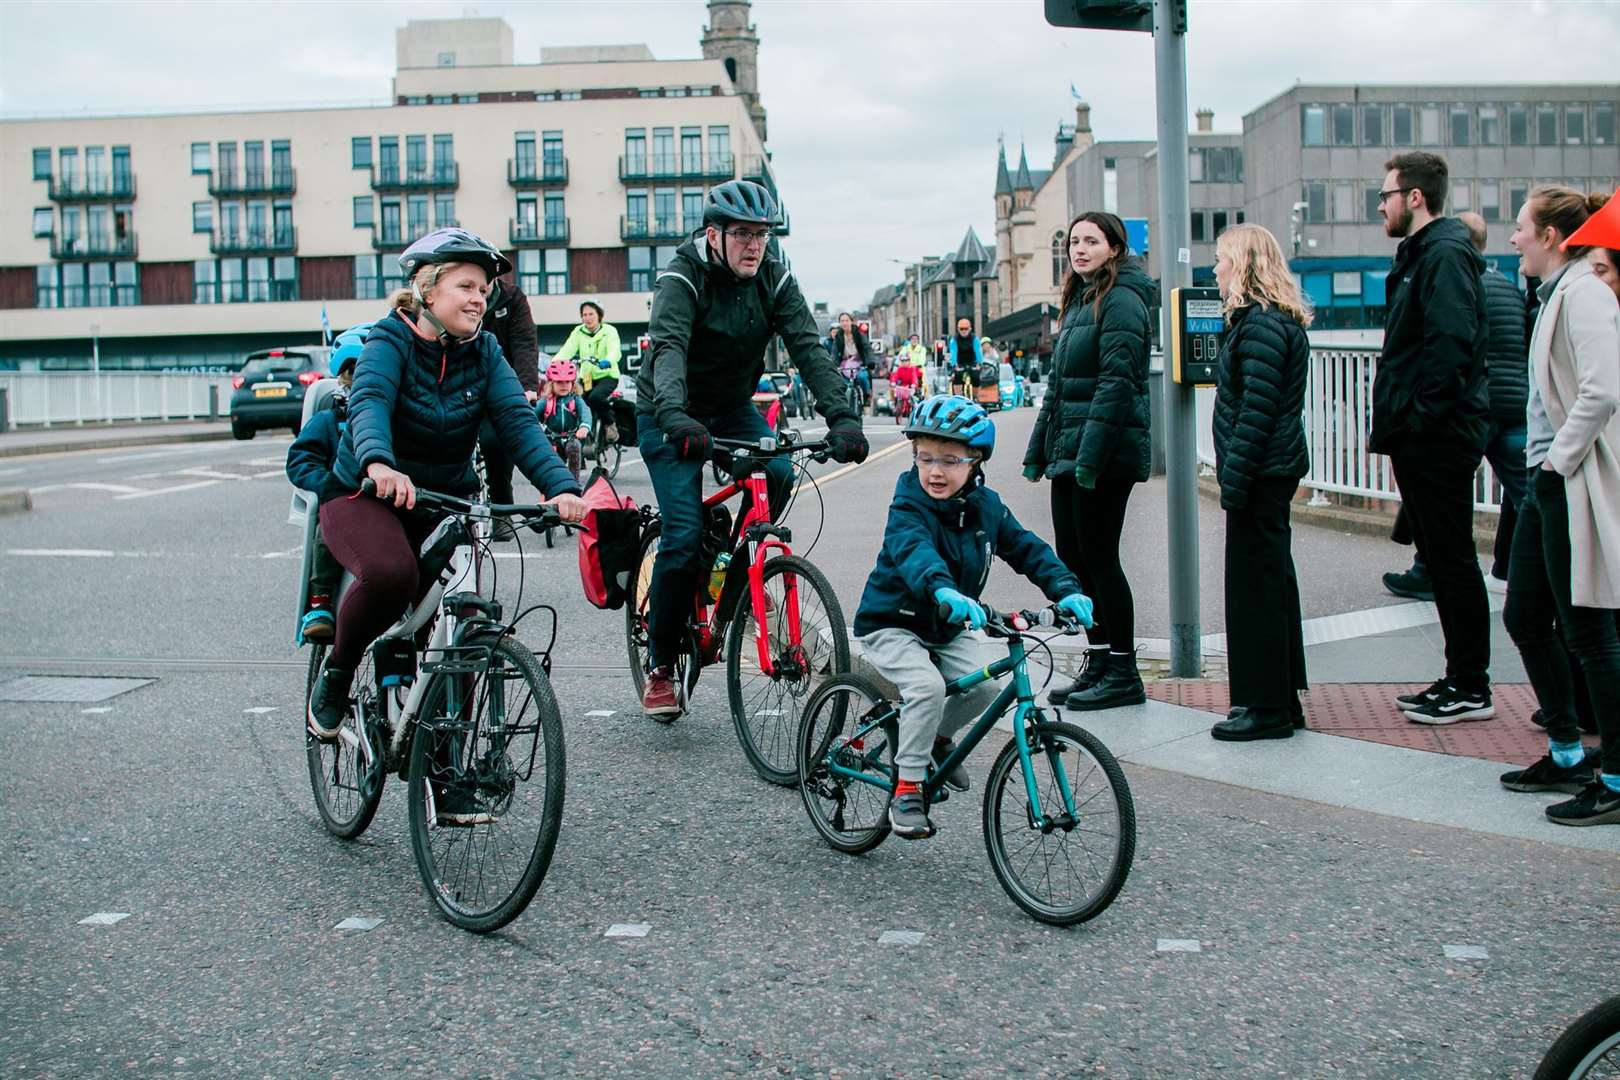 Scenes from the Kidical Mass rally in Inverness. Pictures: Katie Noble